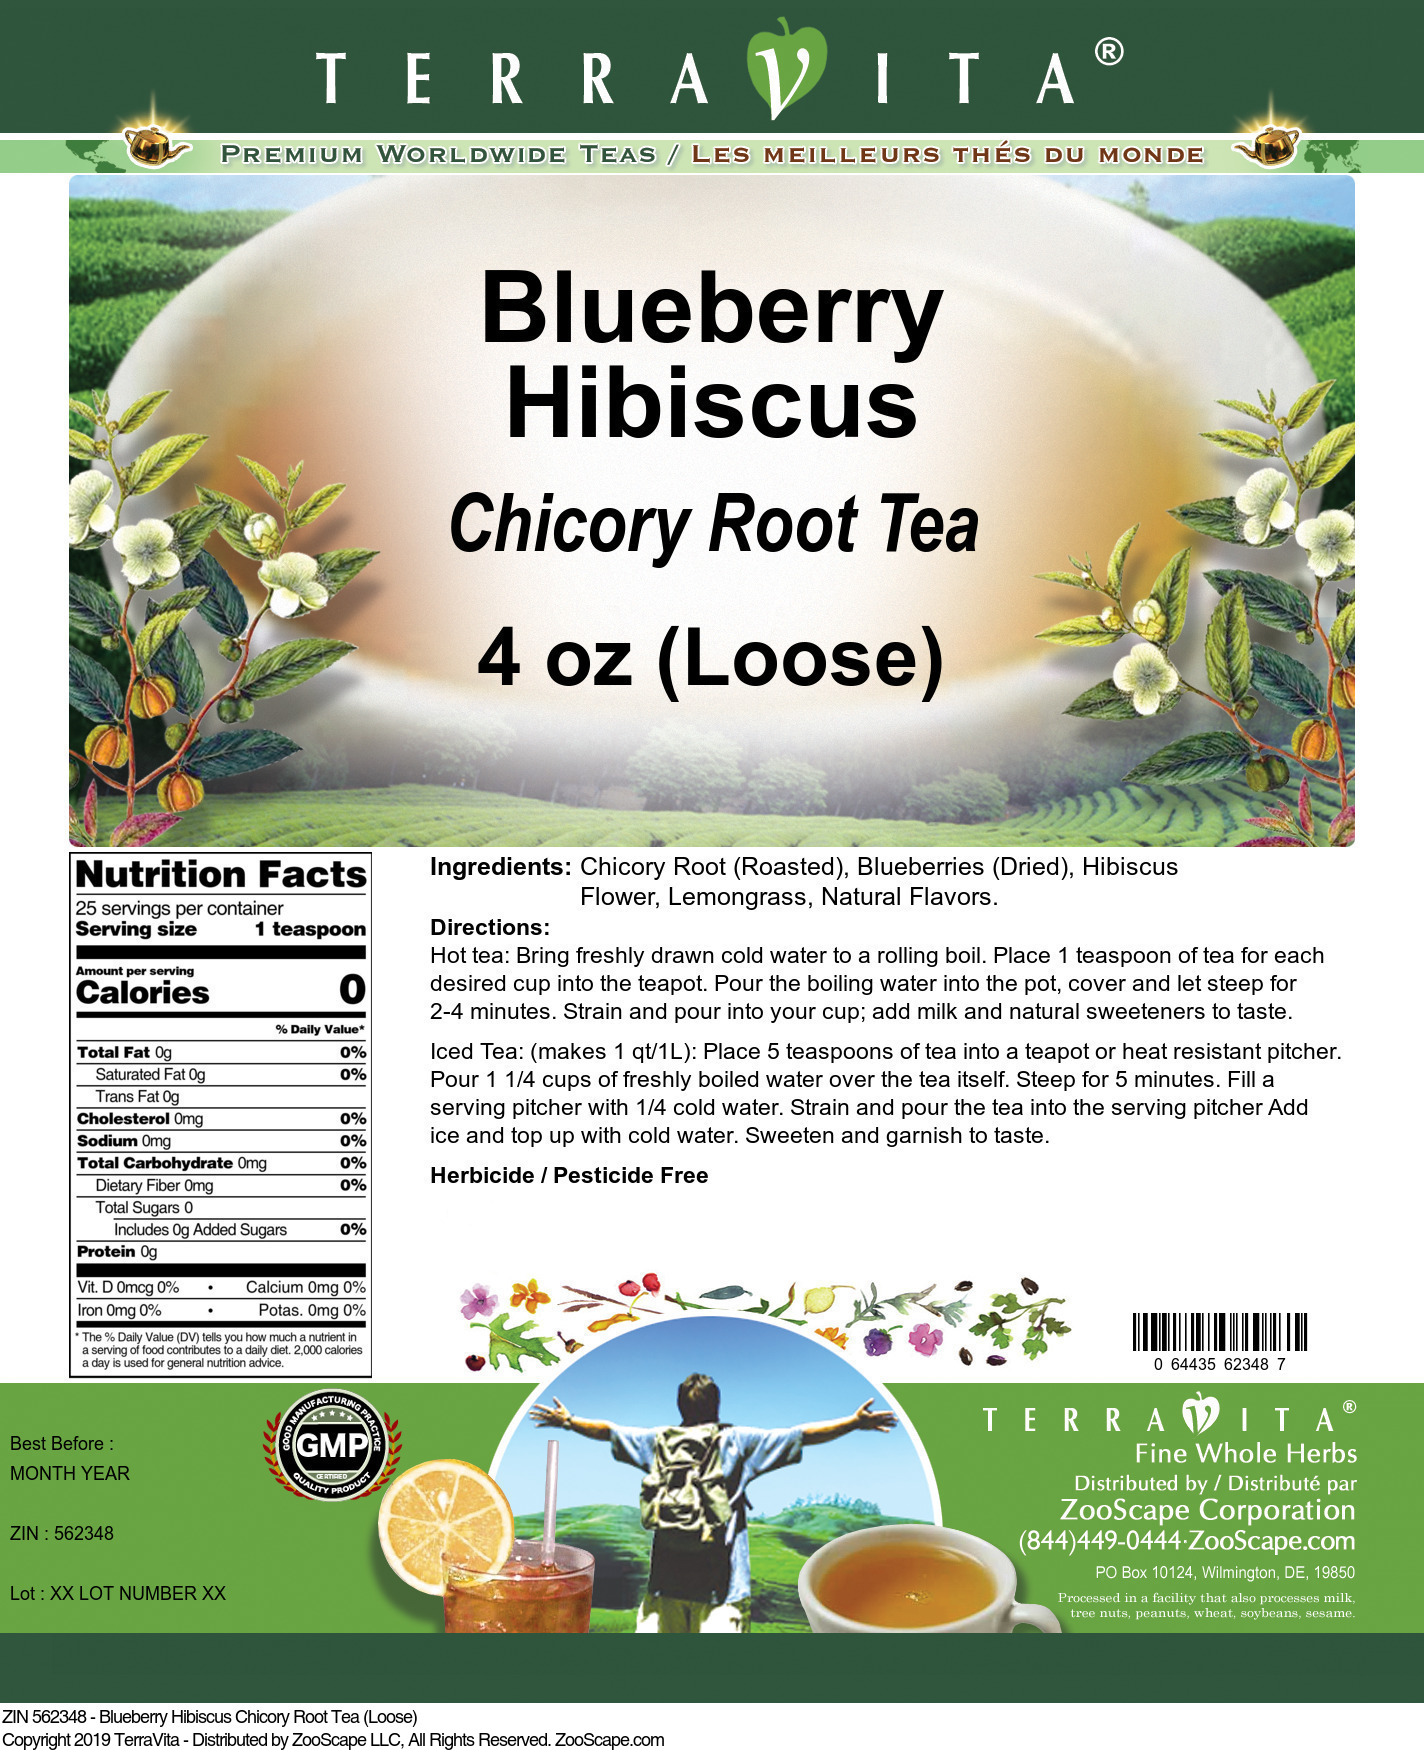 Blueberry Hibiscus Chicory Root Tea (Loose) - Label